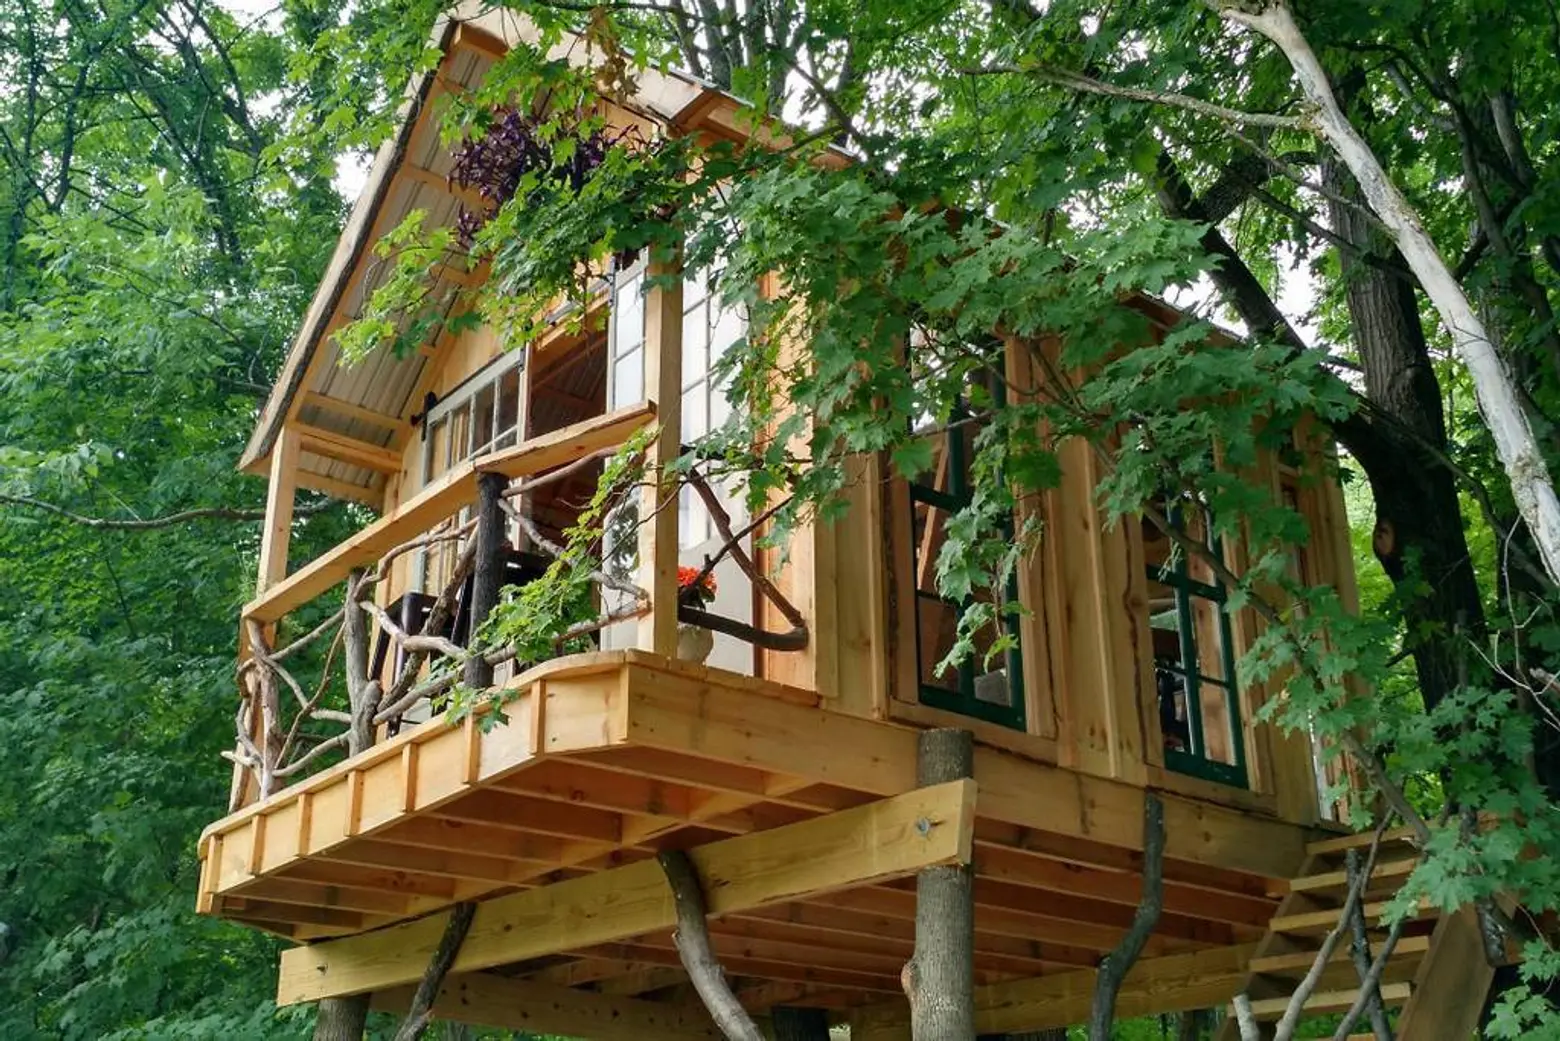 Go camping among the trees in this $195/night treehouse in Upstate New York